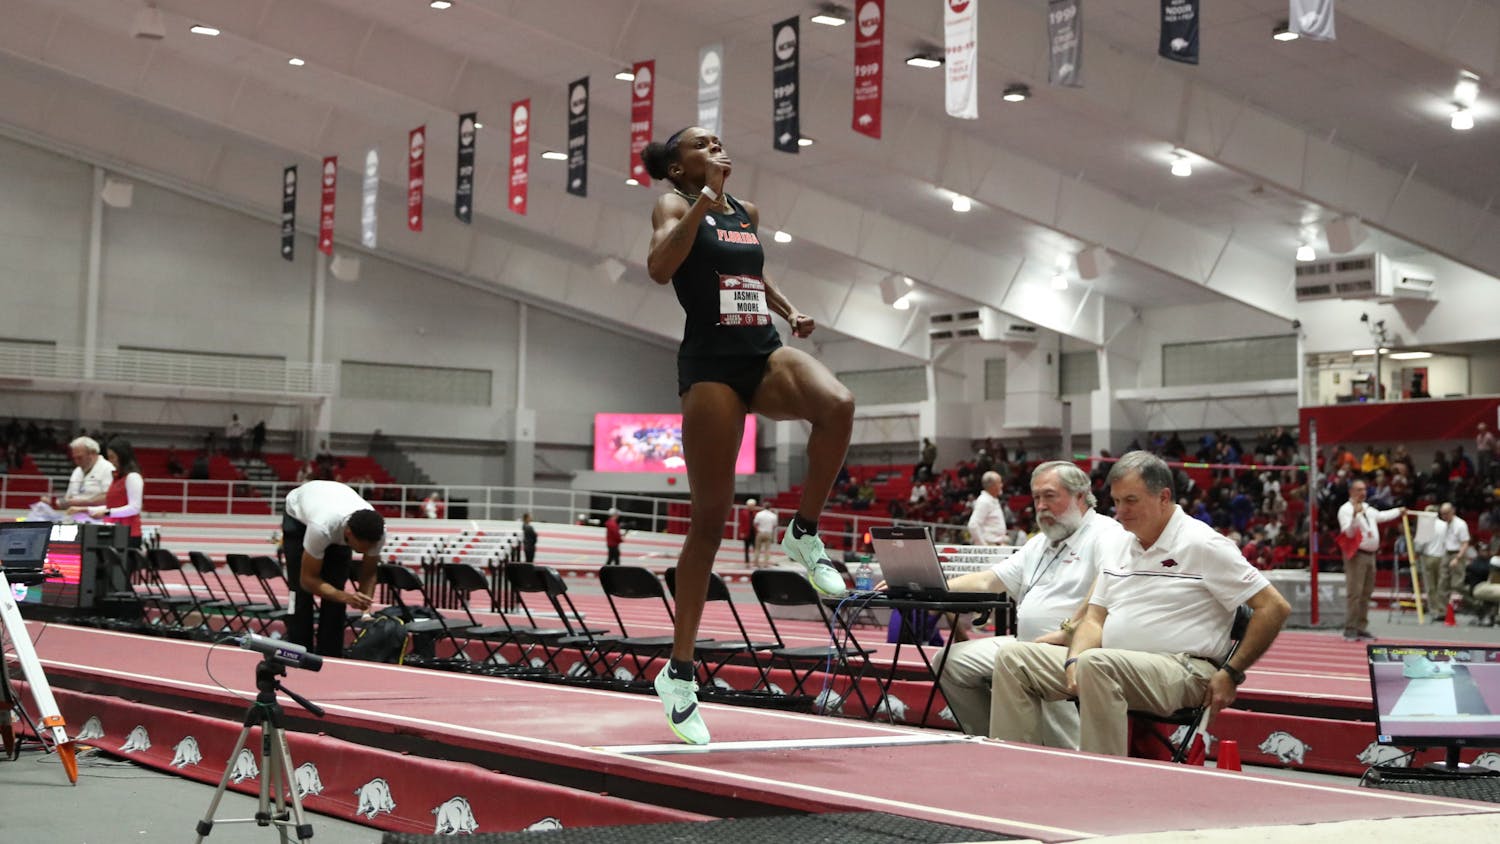 Florida senior Jasmine Moore competes in the long jump during the Razorback Invitational Friday, Jan. 27, 2023 at Randal Tyson Track Center in Fayetteville, Arkansas / Photo by Anna Carrington